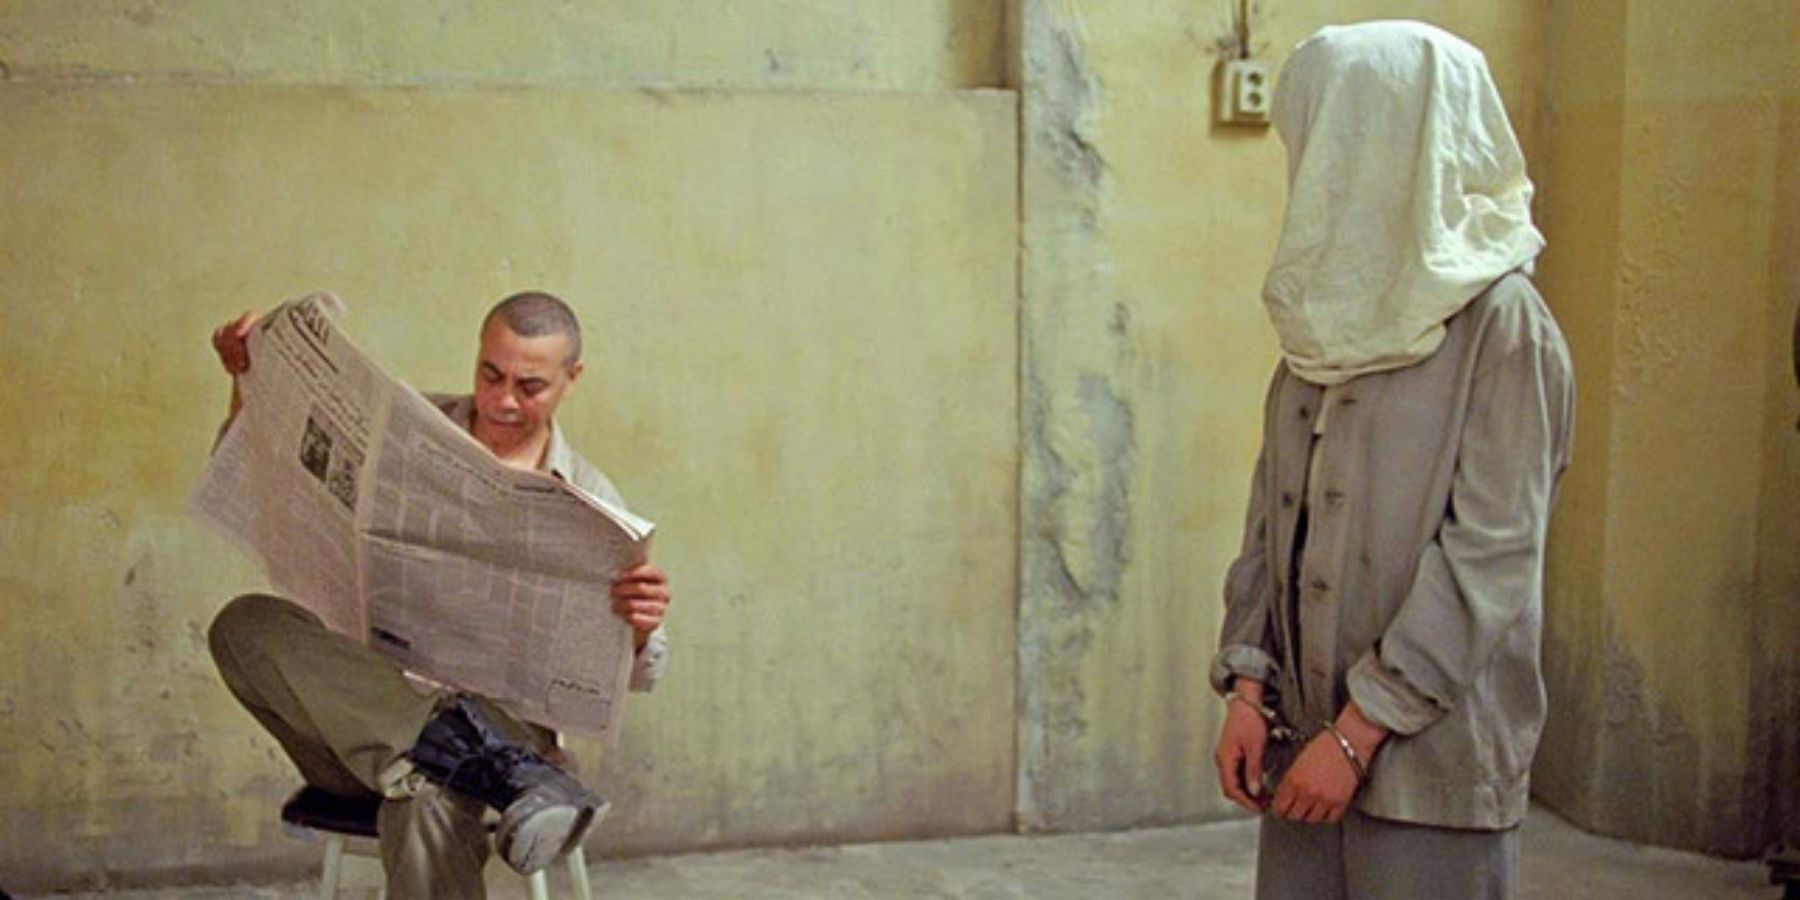 A man reads a newspaper while a woman stands besife it, with a bag covering her head